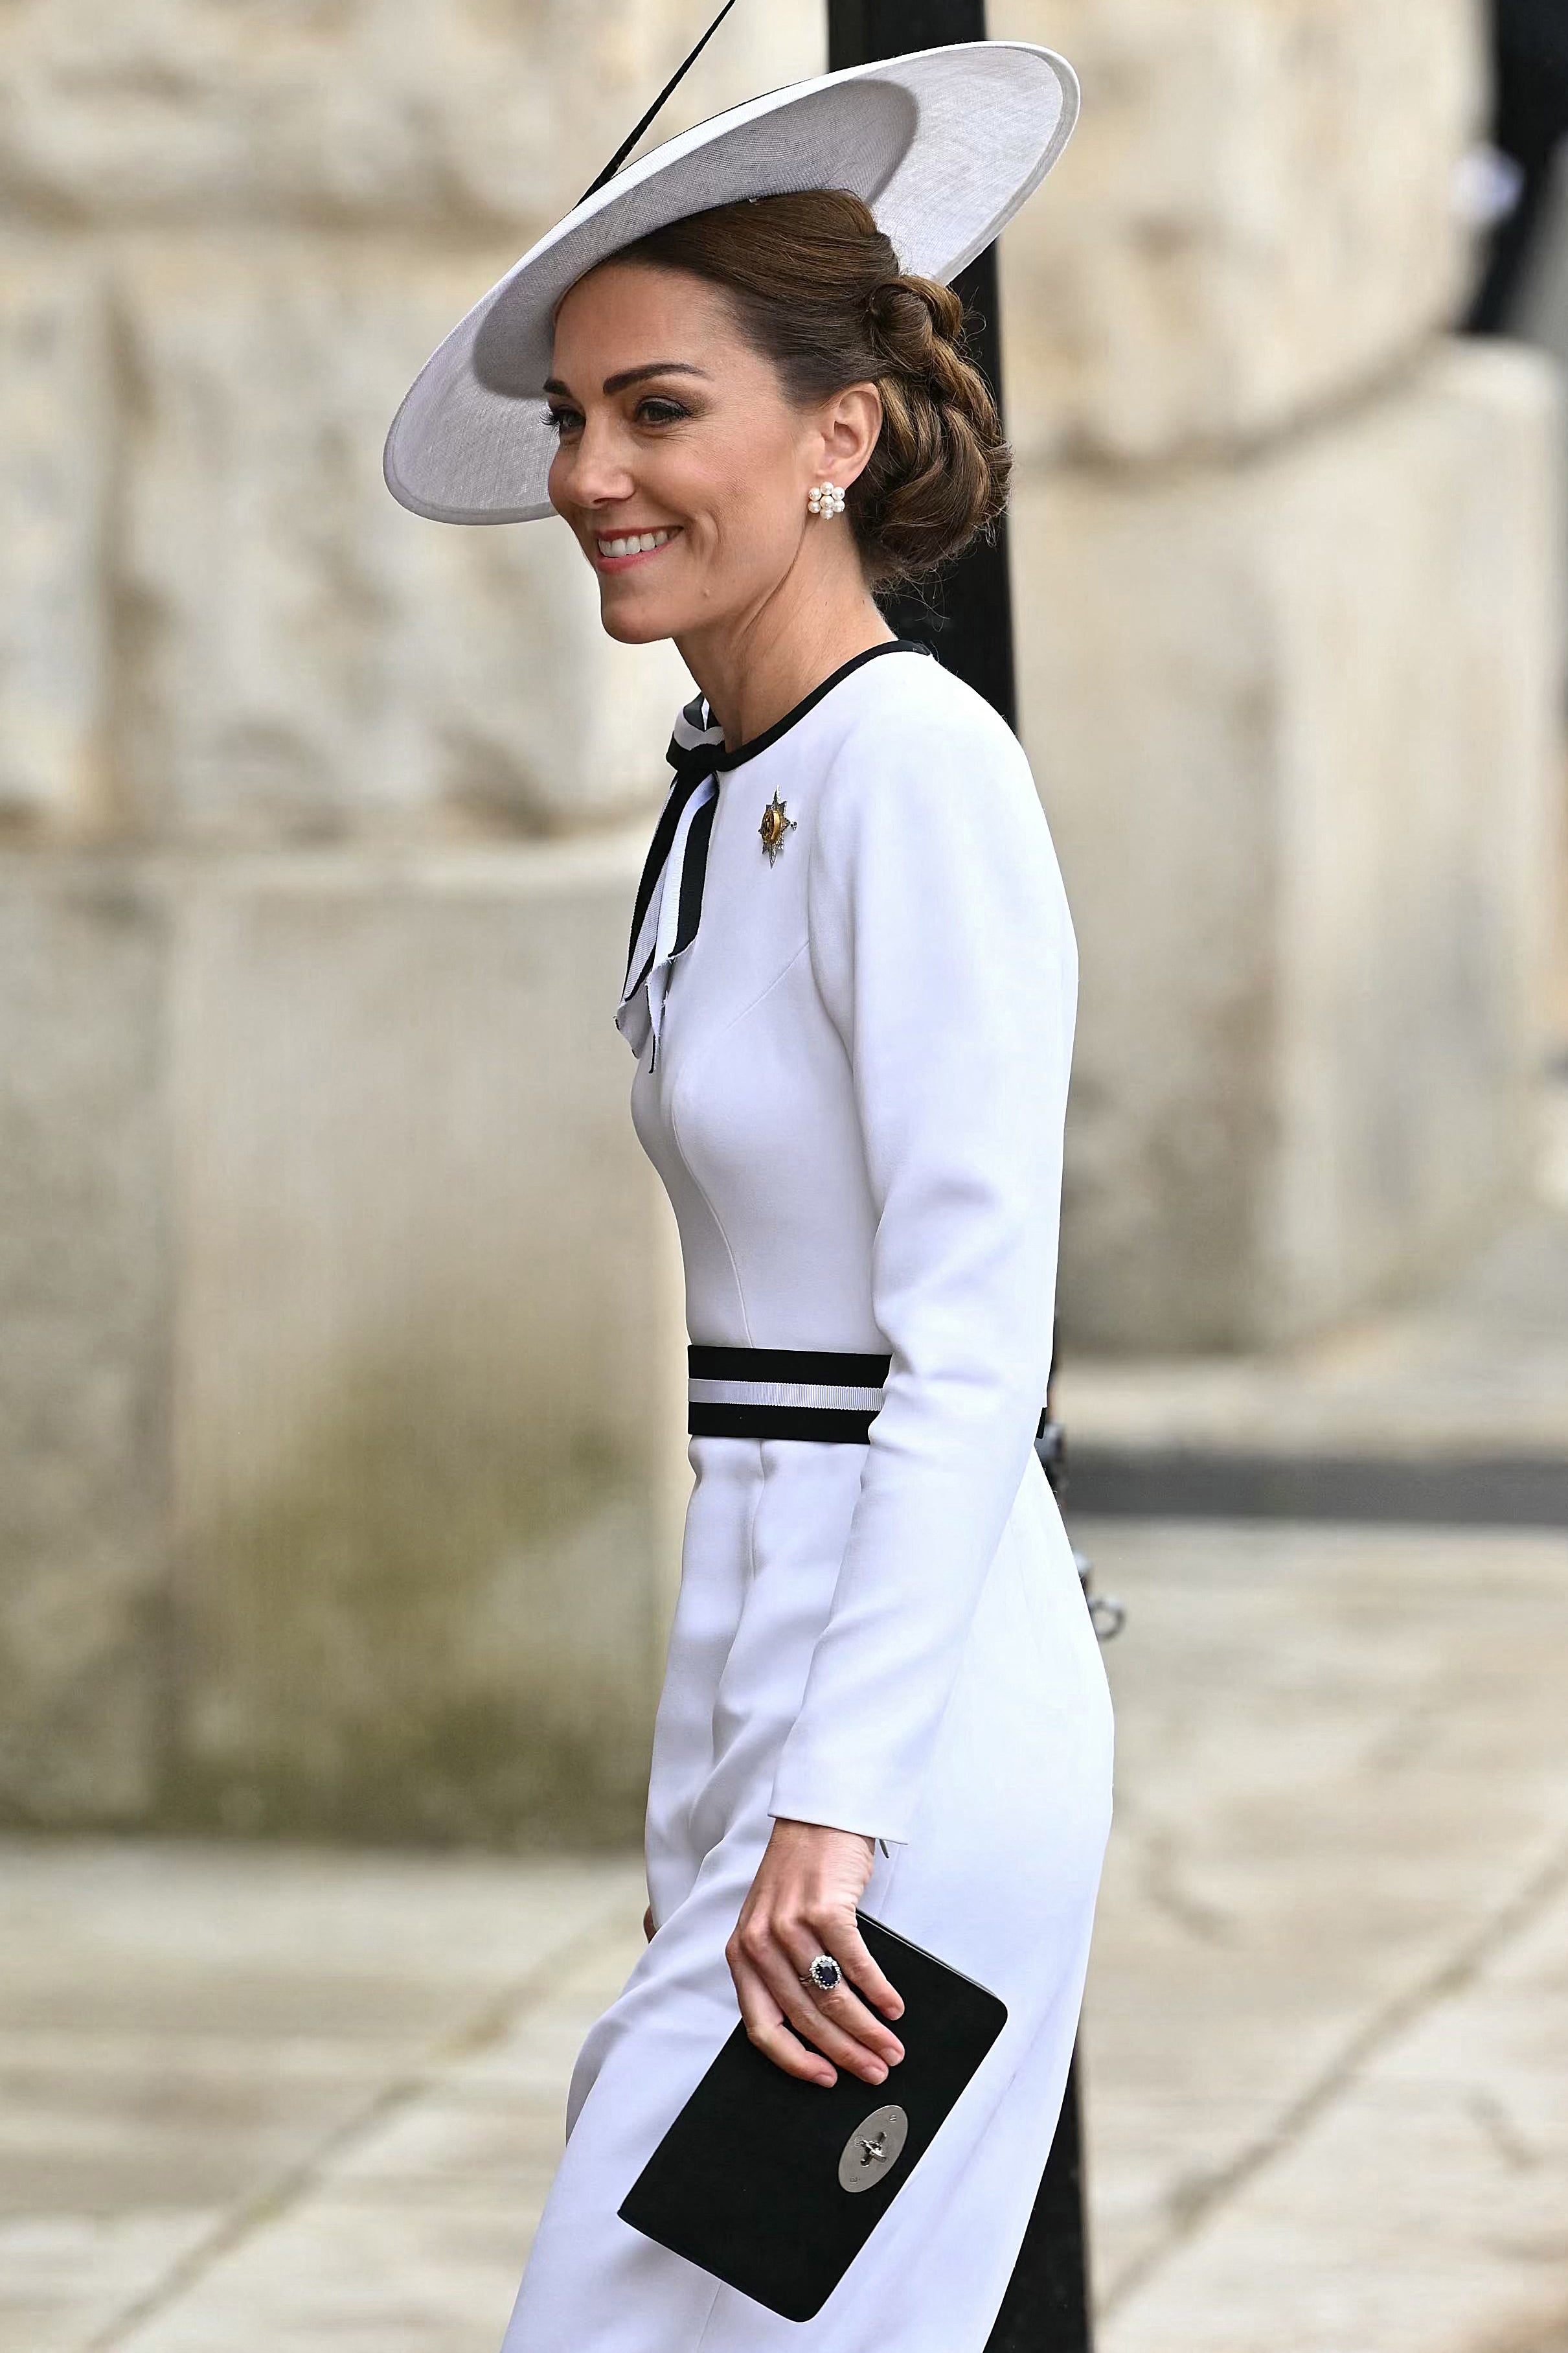 prince william, prince george, princess charlotte, princess of wales, king charles iii, trooping the colour, kate wears bold white dress last seen at coronation as she returns to public duties at trooping the colour